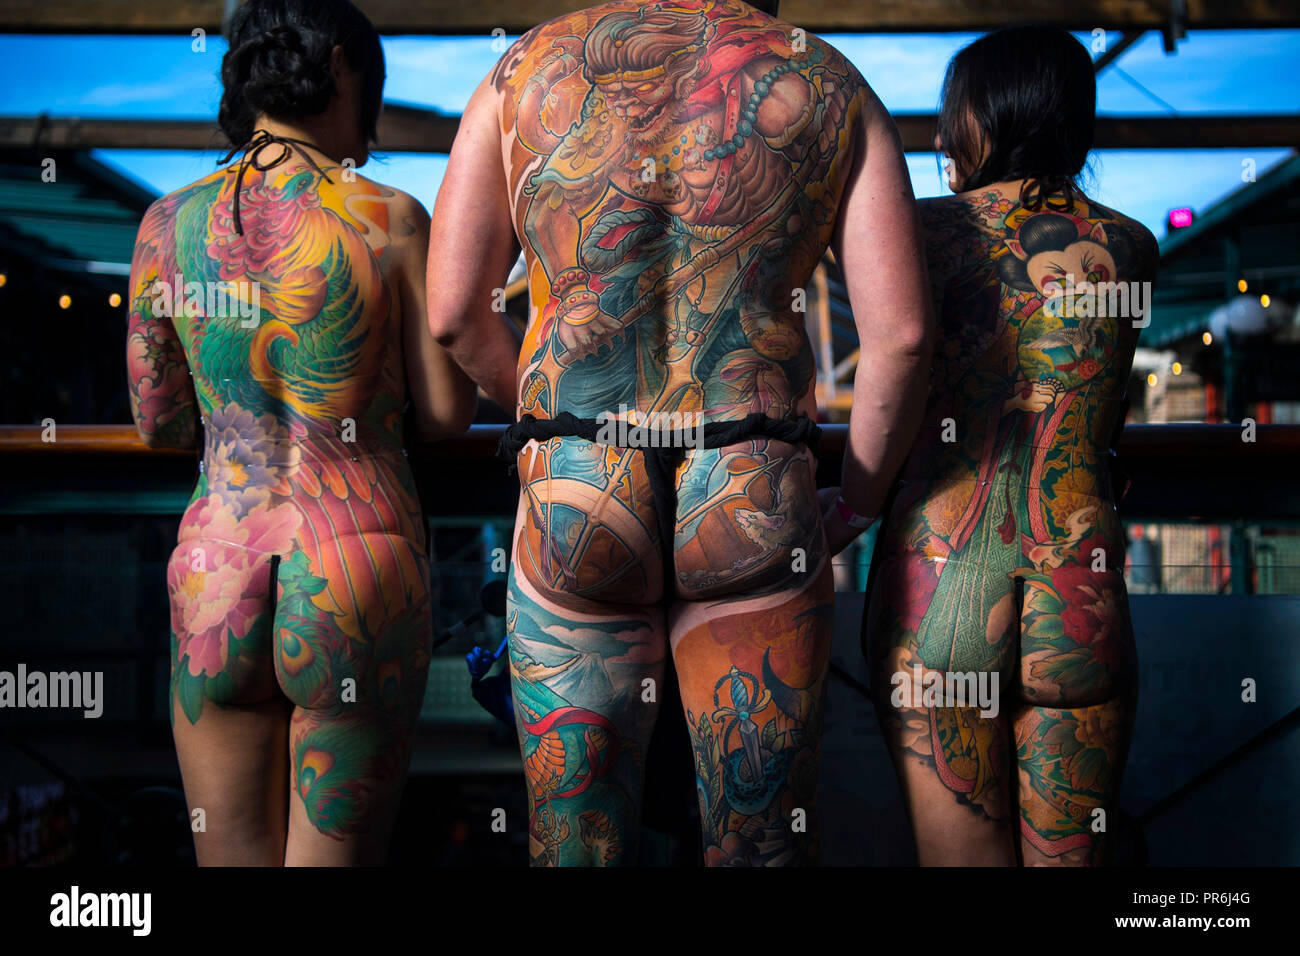 People show off their tattoos during the International tattoo convention at Tobacco Dock in east London. Stock Photo